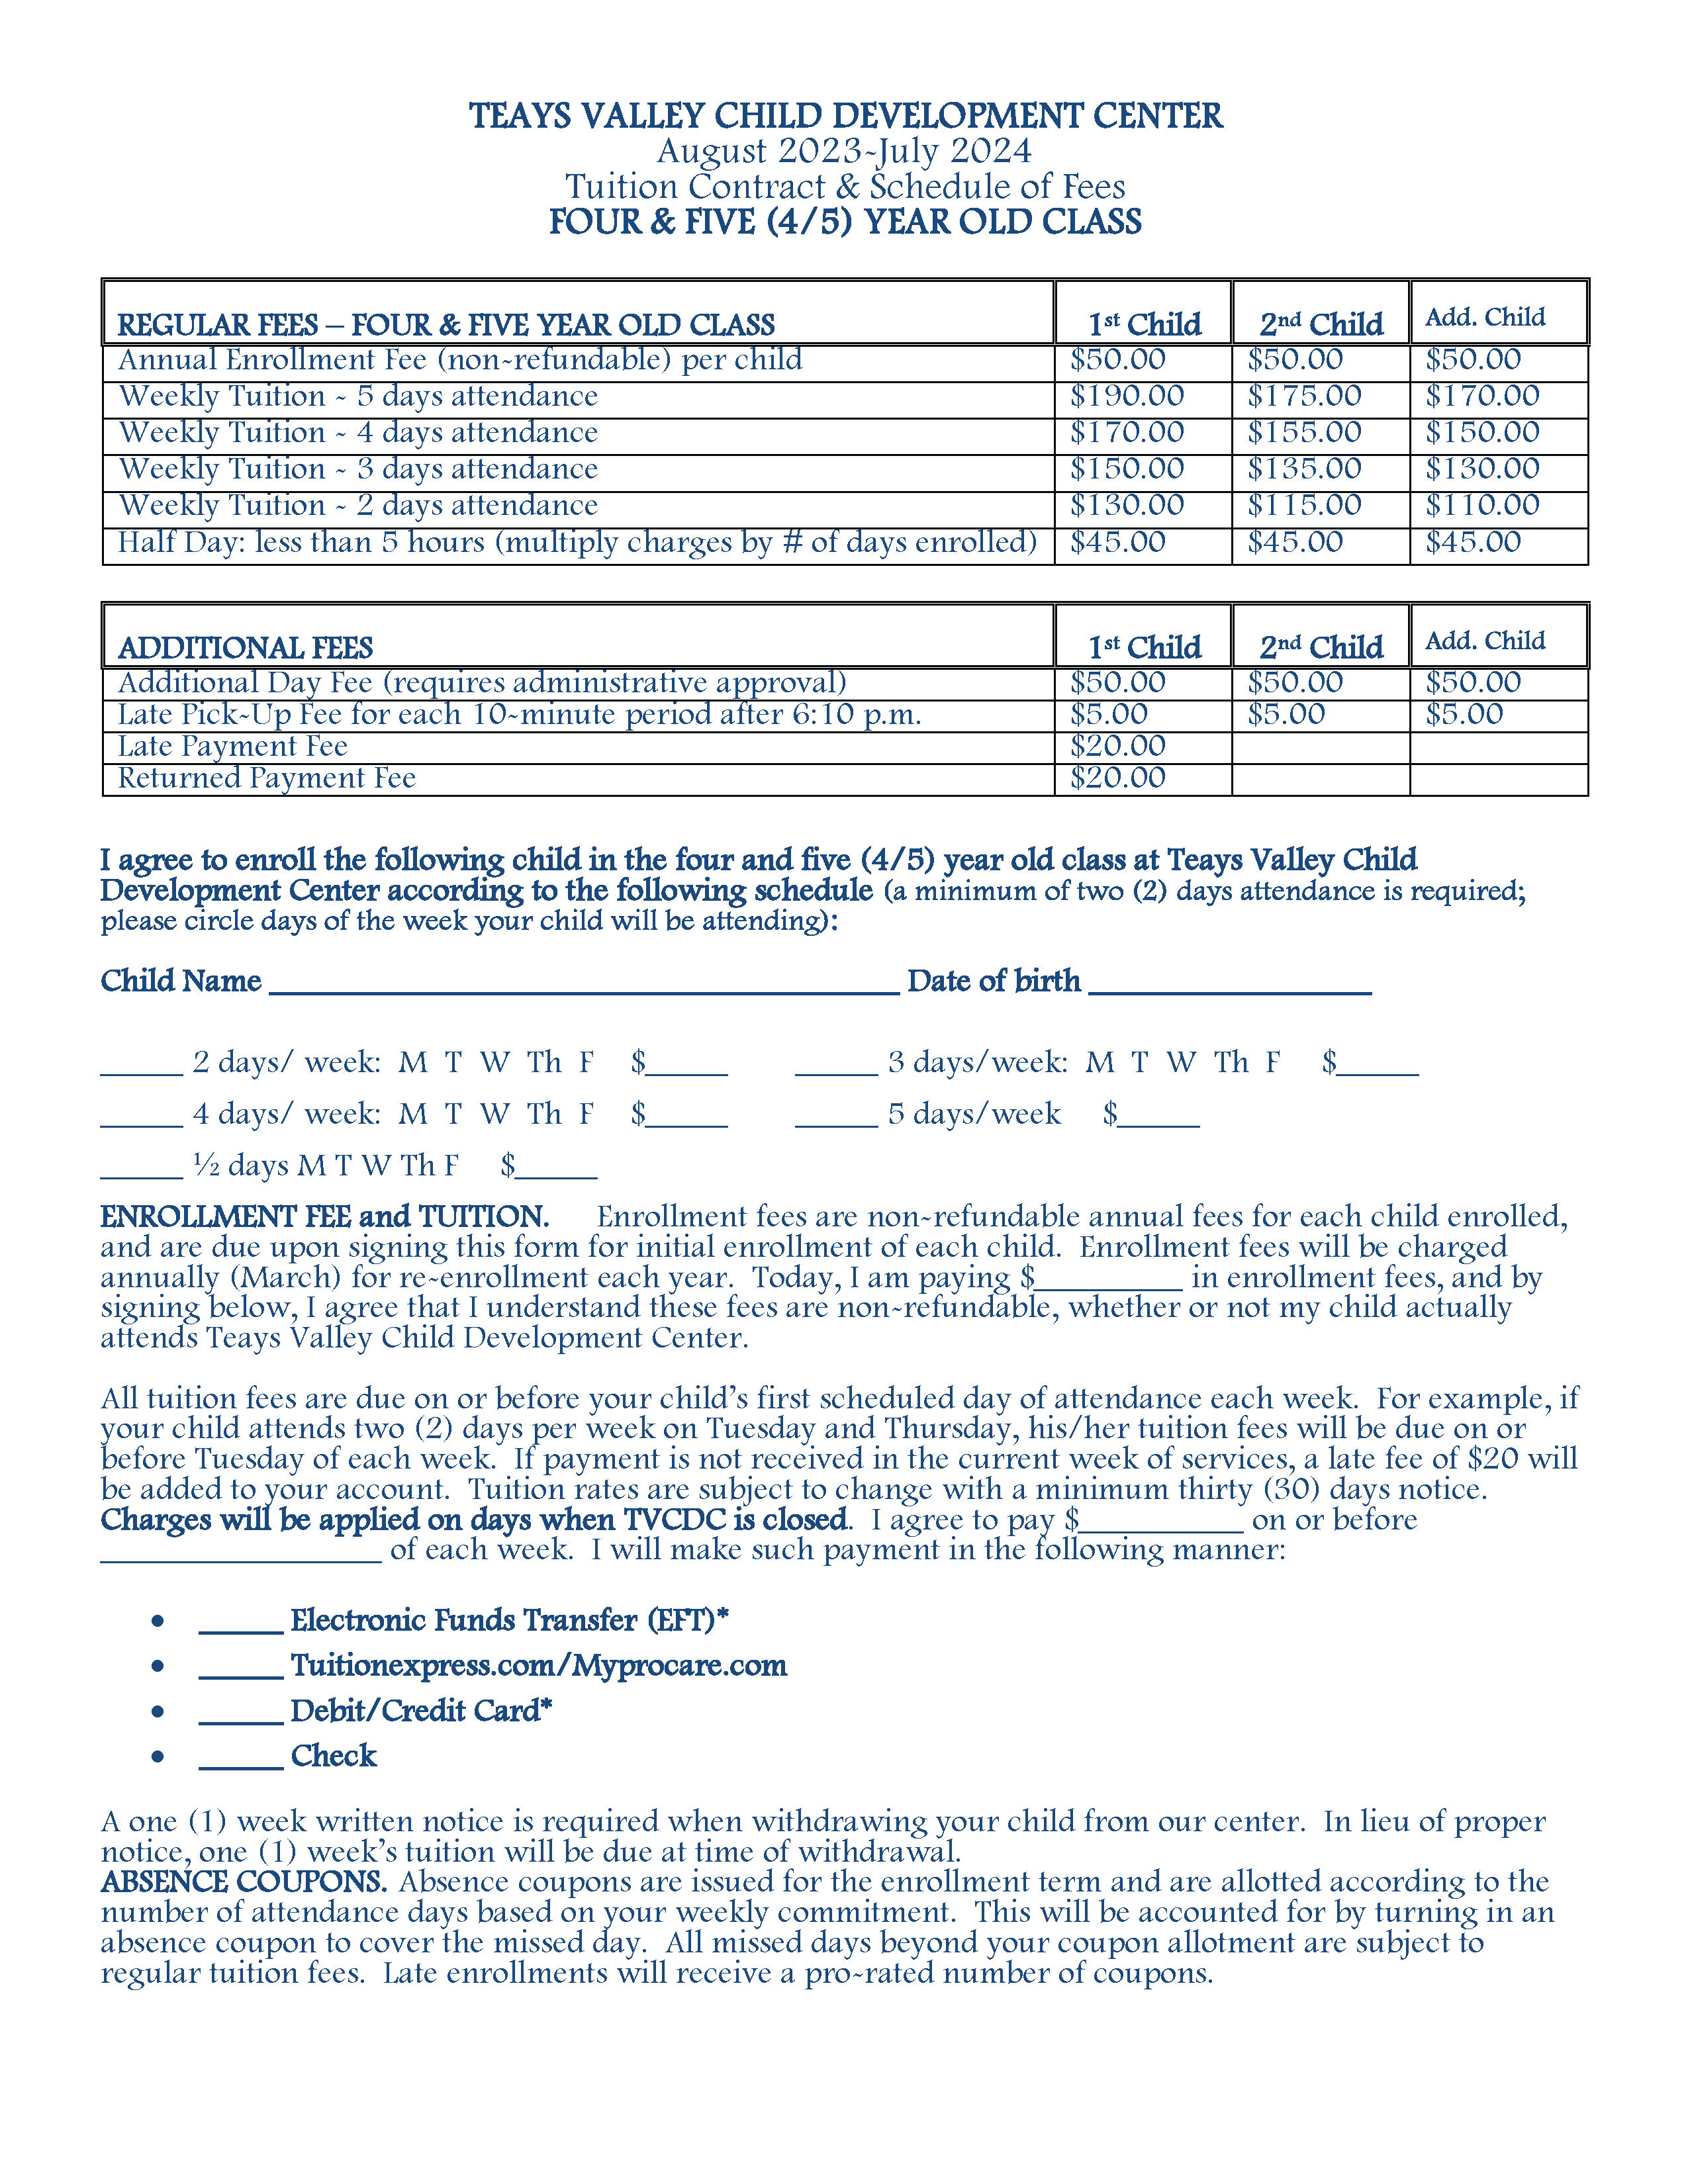 Four and Five Year Old Pay Agreement Page 1